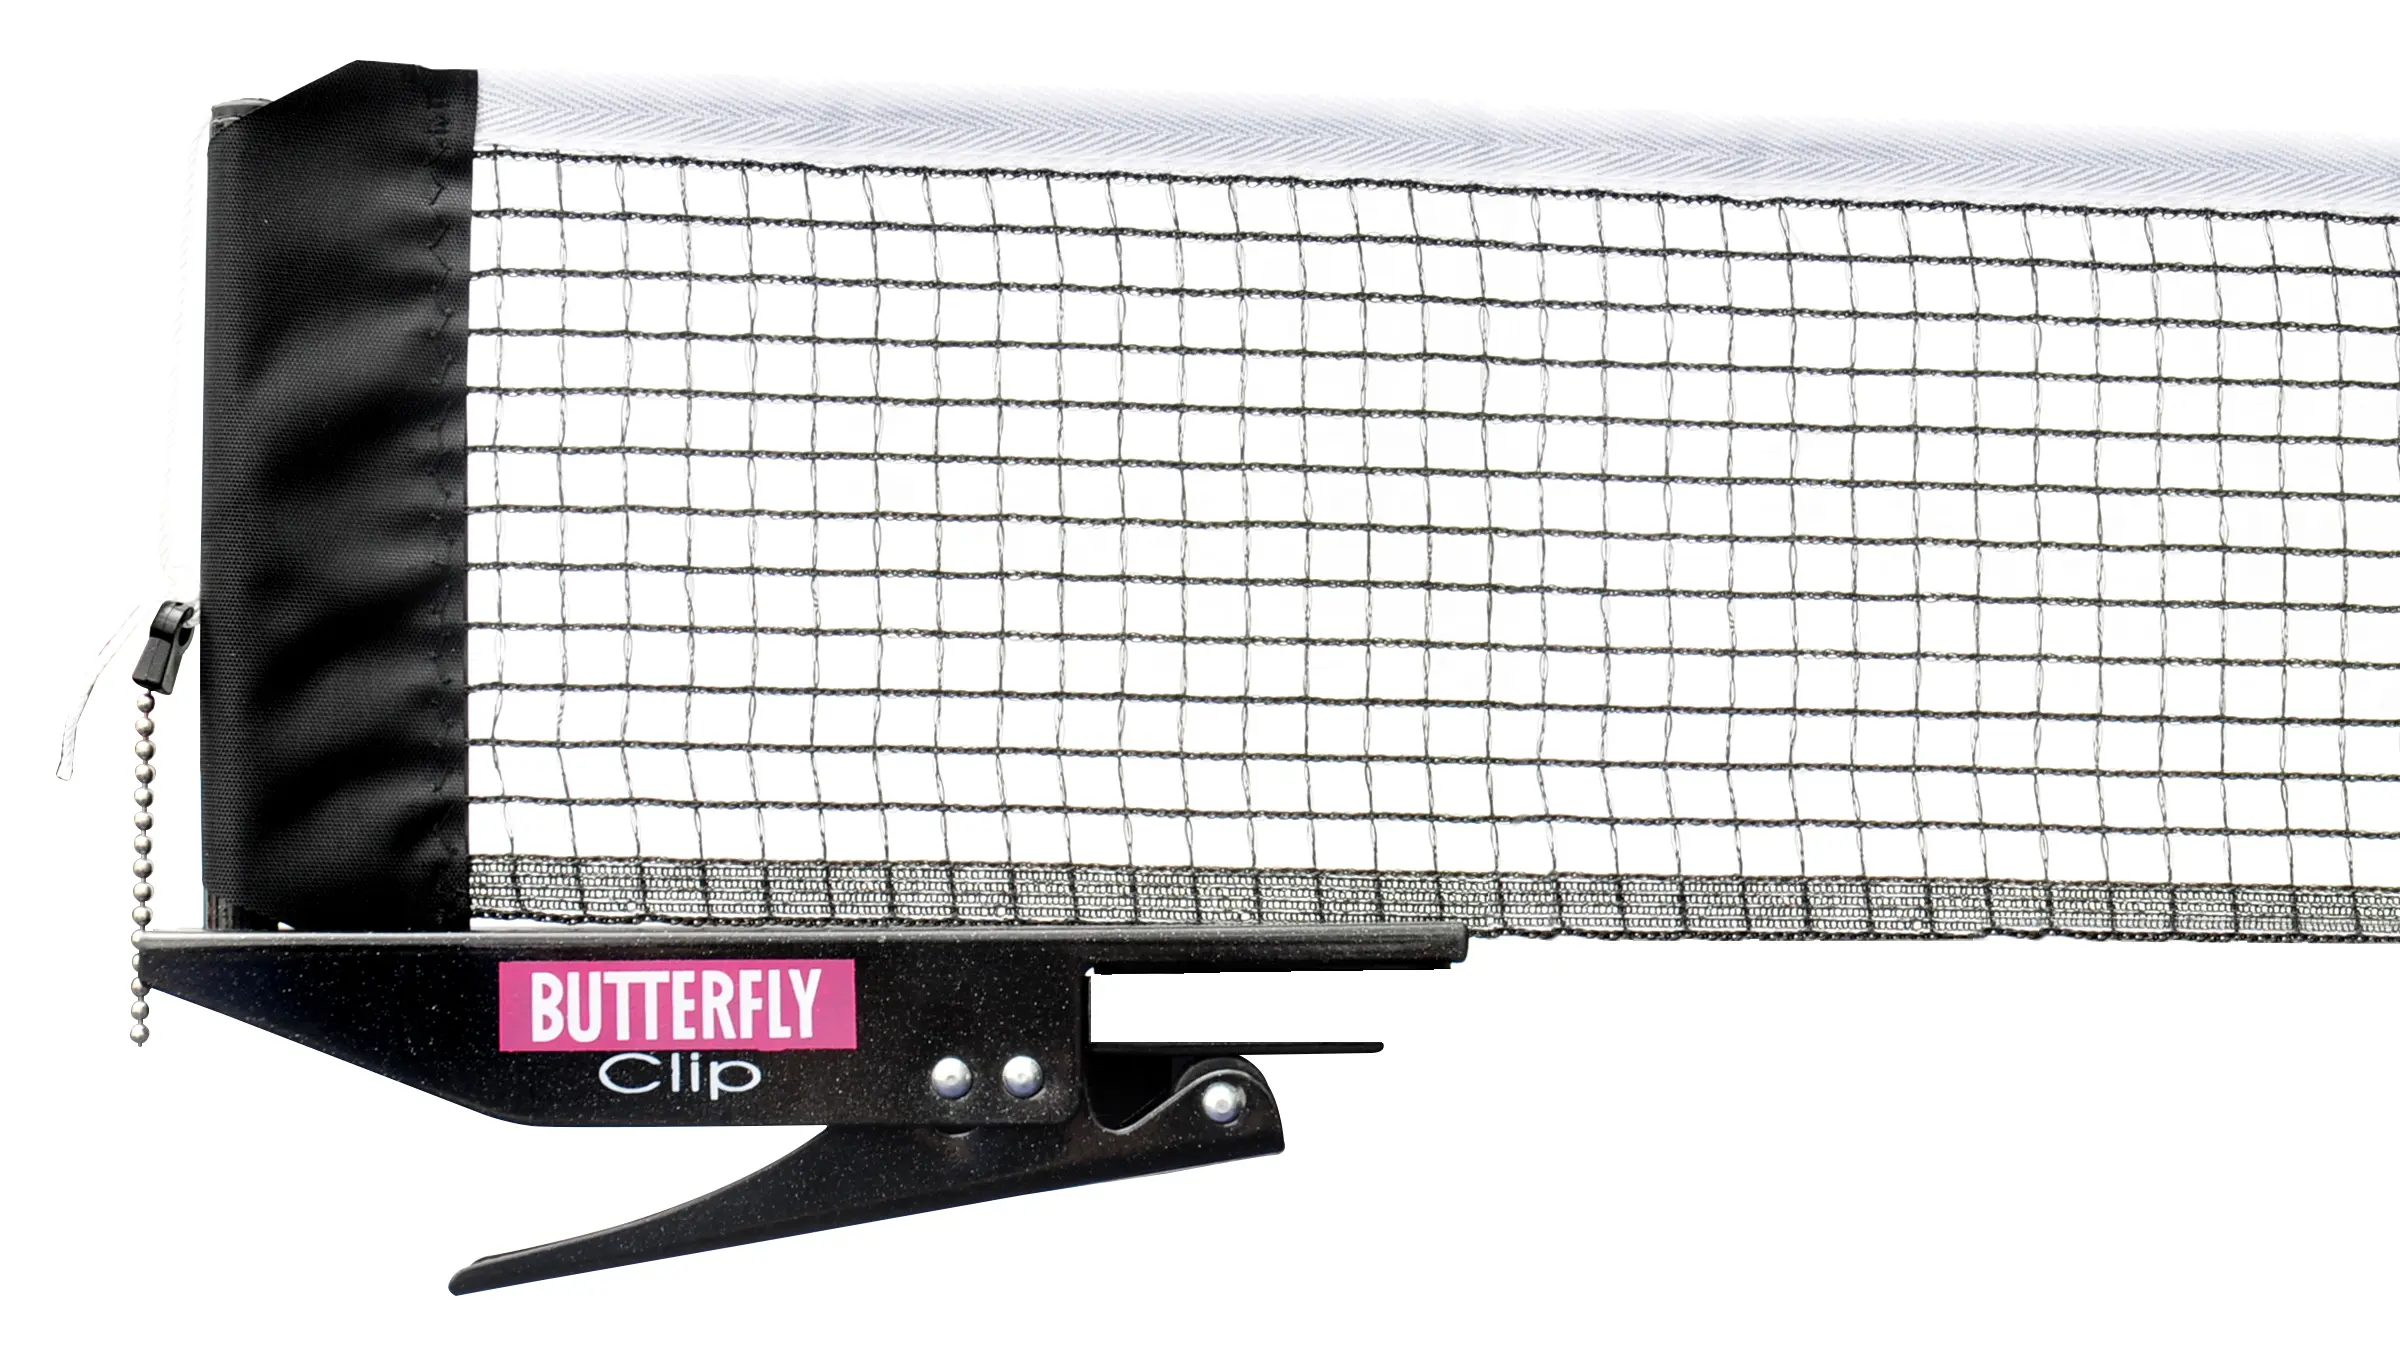 Butterfly Garden 4000 Blue Outdoor Rollaway Table Tennis Table image thumbnail